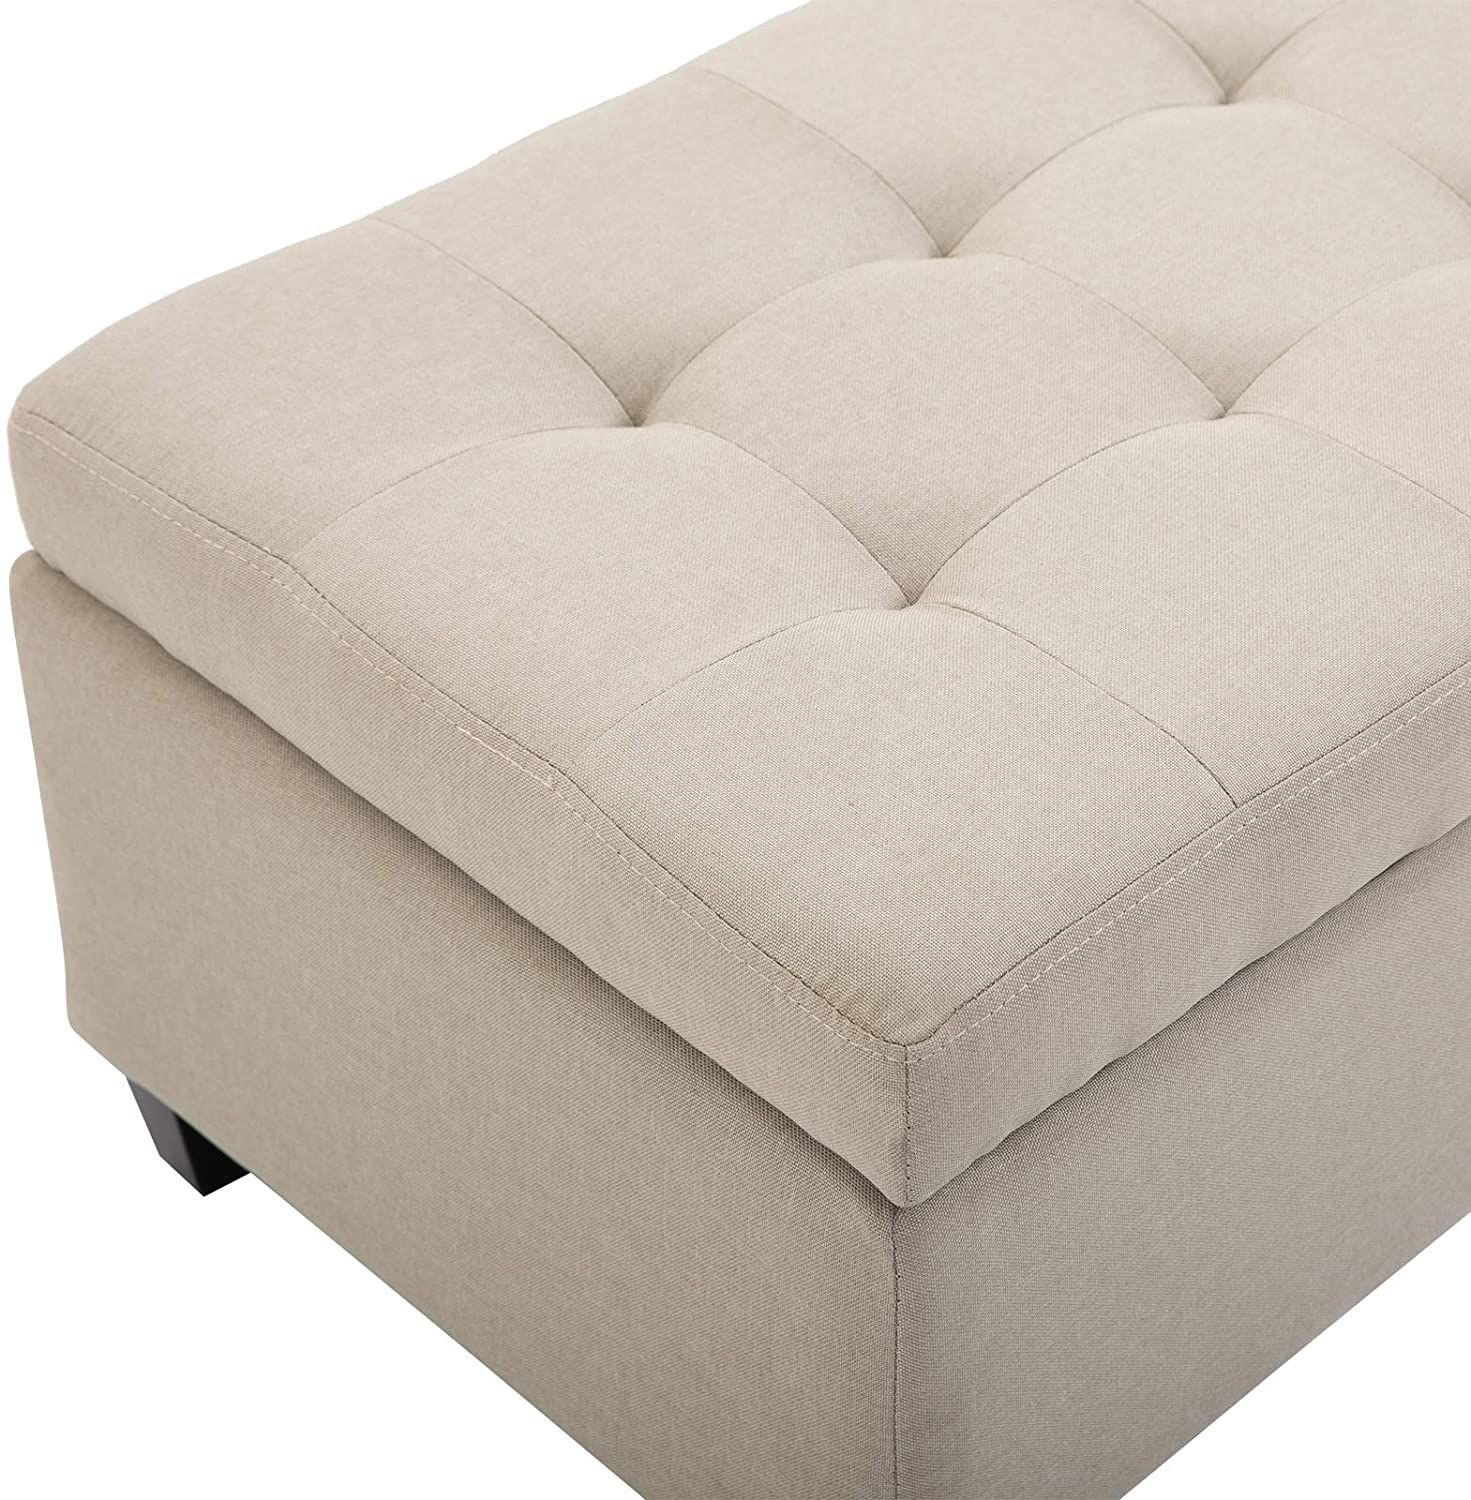 51" Large Tufted Linen Fabric Ottoman Storage Bench With Soft Close Top Intended For Cream Fabric Tufted Oval Ottomans (View 8 of 20)